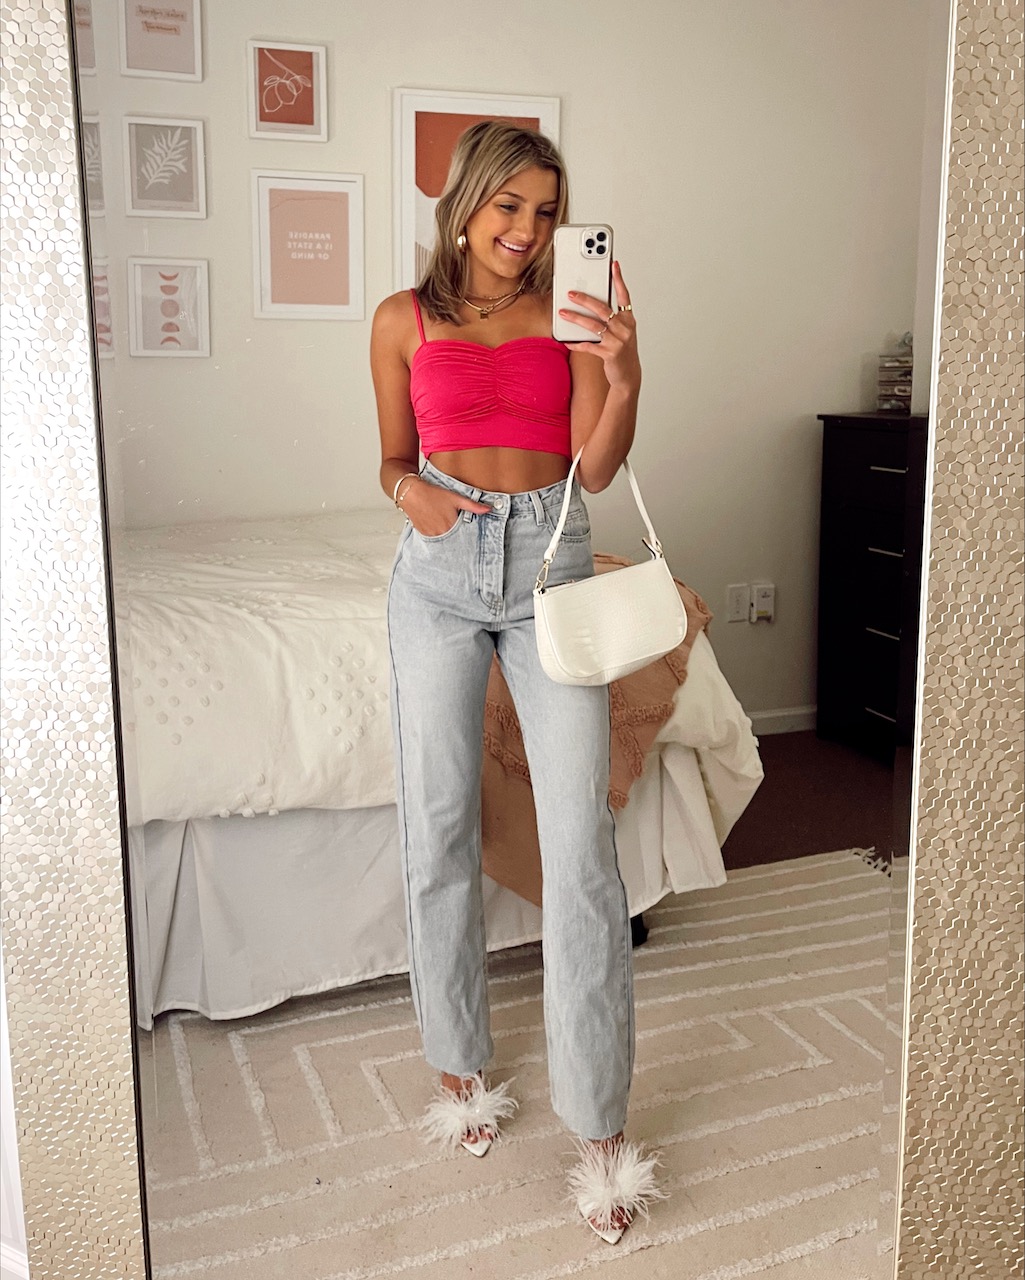 15 Outfits Ideas For Valentine's Day 2022